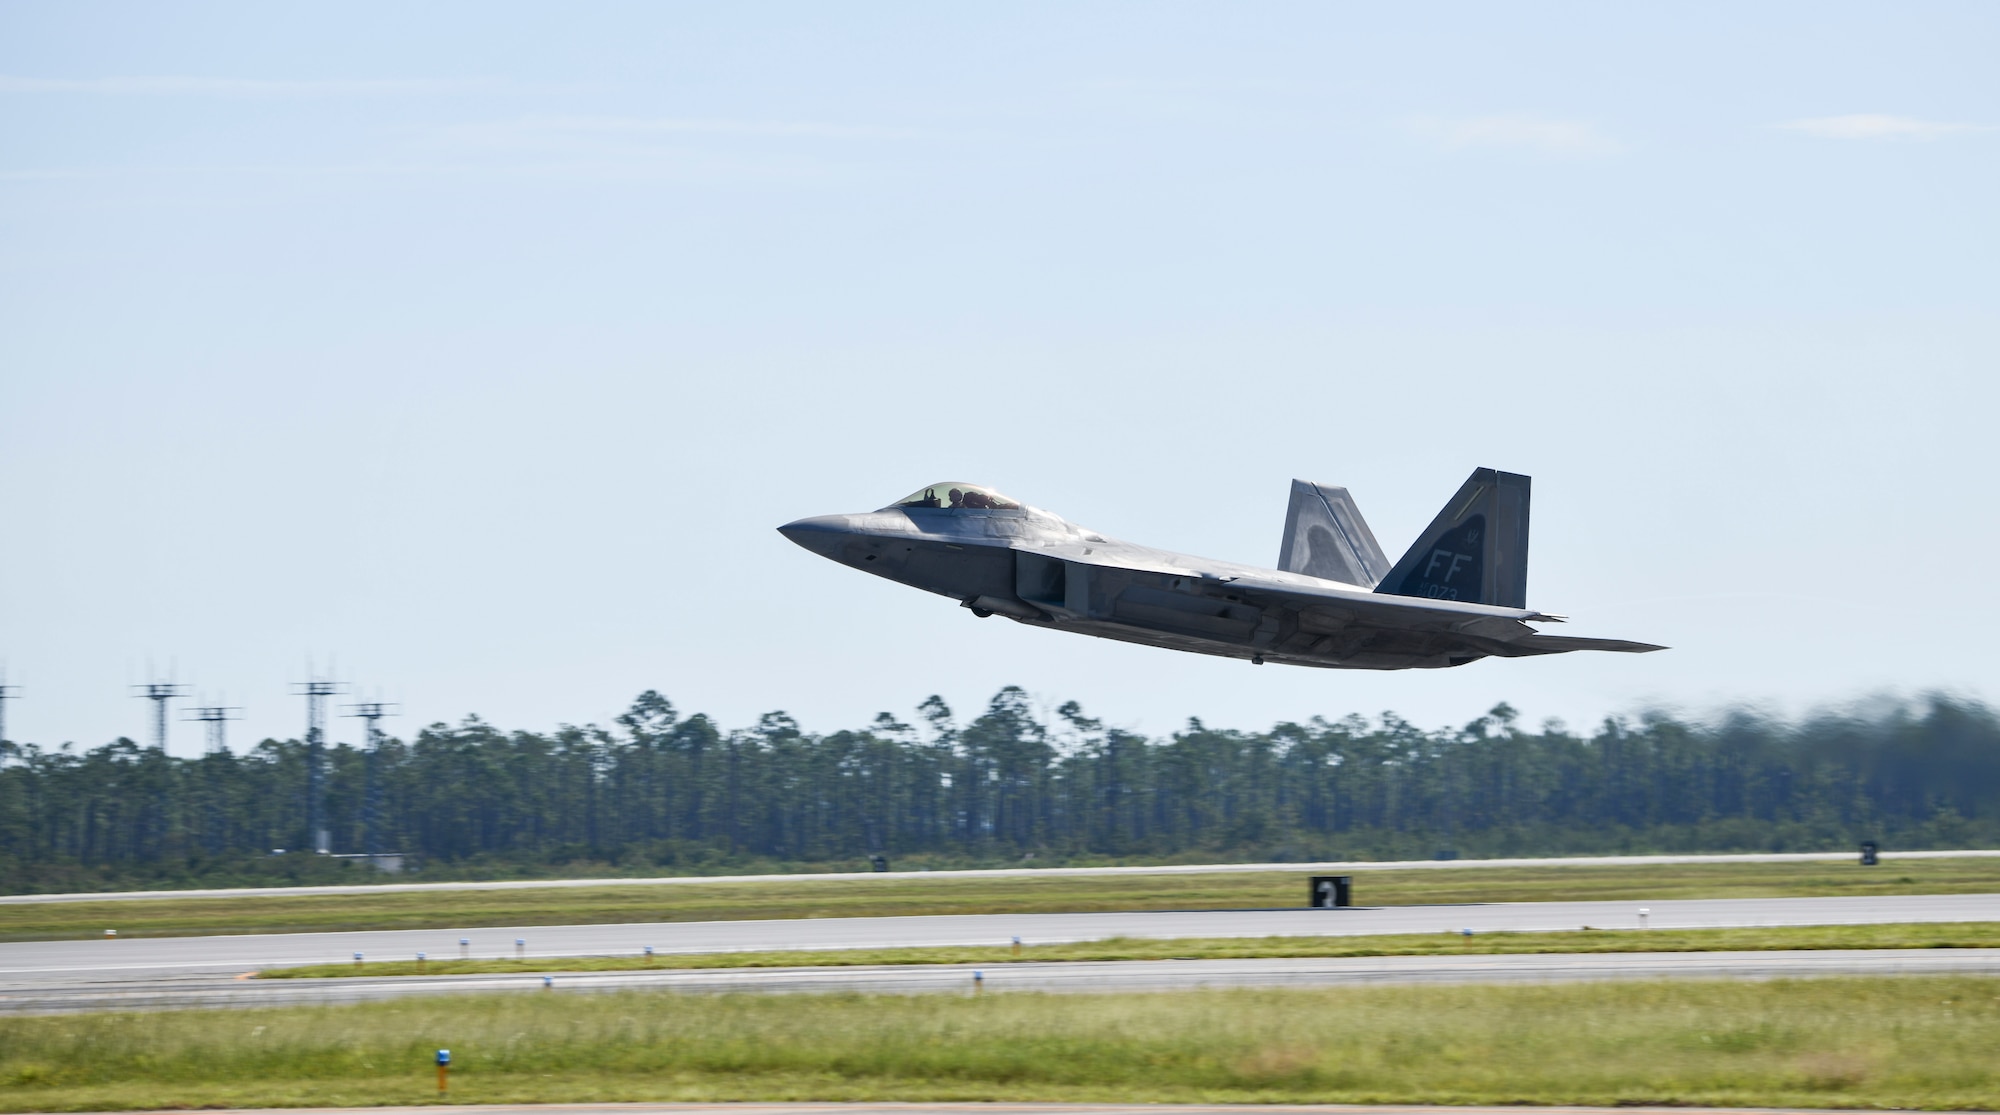 A U.S. Air Force F-22 Raptor assigned to Nellis air Force Base, Nevada, takes flight at Tyndall Air Force Base, Florida, Sept. 18, 2020. Langley, along with other units assigned to Air Combat Command, participated in a Weapons System Evaluation Program, which is an event held where air-to-air and air-to-ground armament systems proficiency is tested to maintain mission integrity. (U.S. Air Force photo by Senior Airman Stefan Alvarez)